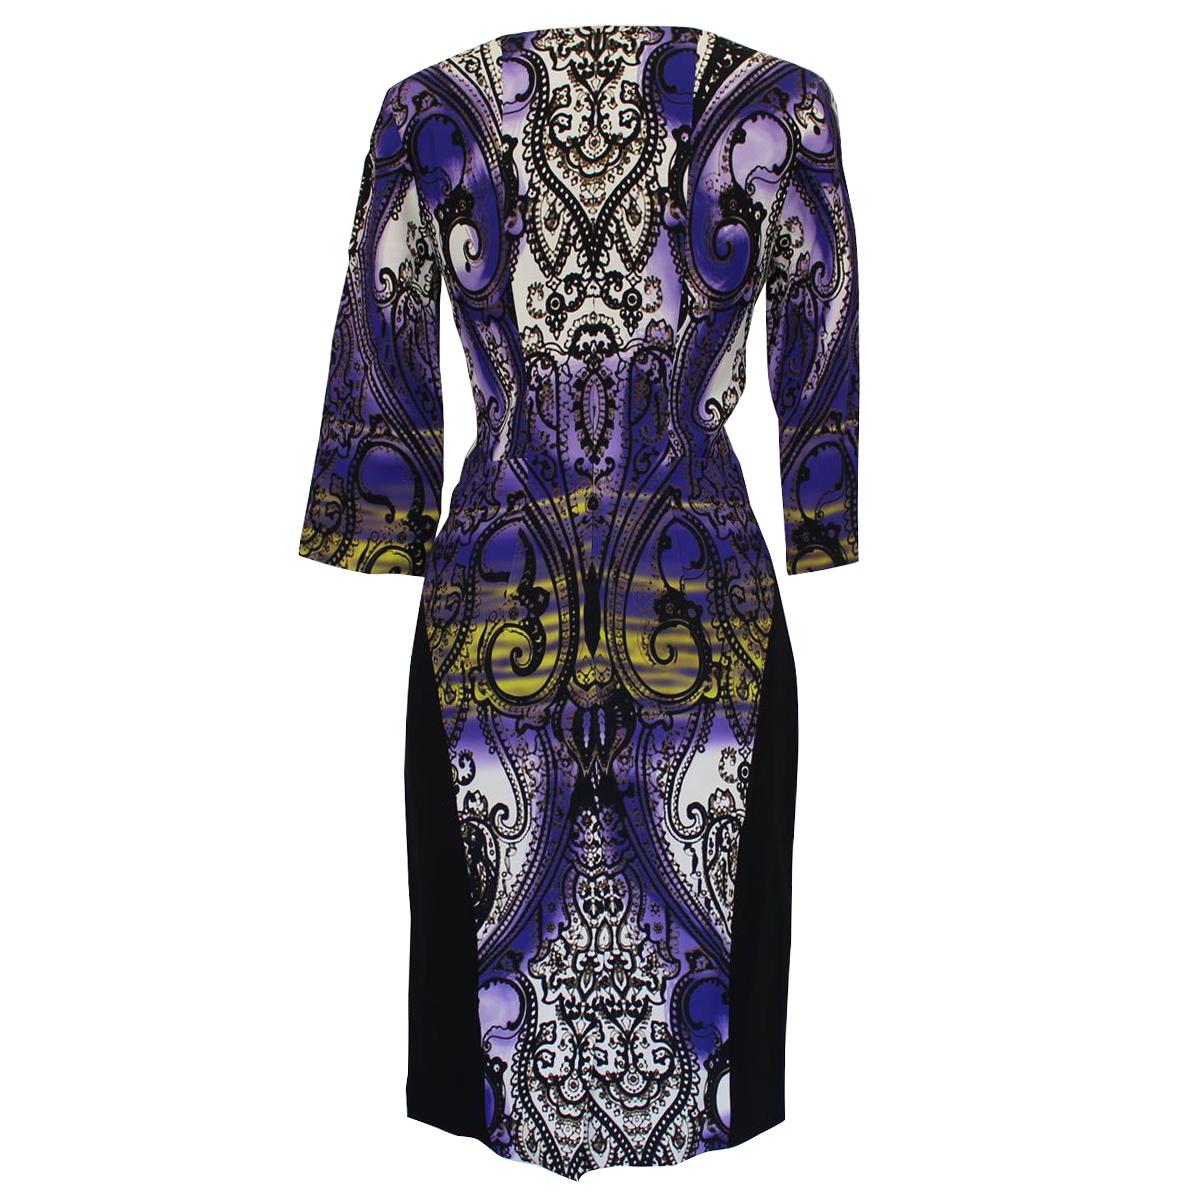 Beautiful Etro printed dress
Viscose (96%) Elasthane
Black, purple and white colour
Fancy print
3/4 sleeve
Total lenght (shoulder/hem) cm 97 (38.1inches)
Shoulder cm 38 (14.9 inches)
Worldwide express shipping included in the price !